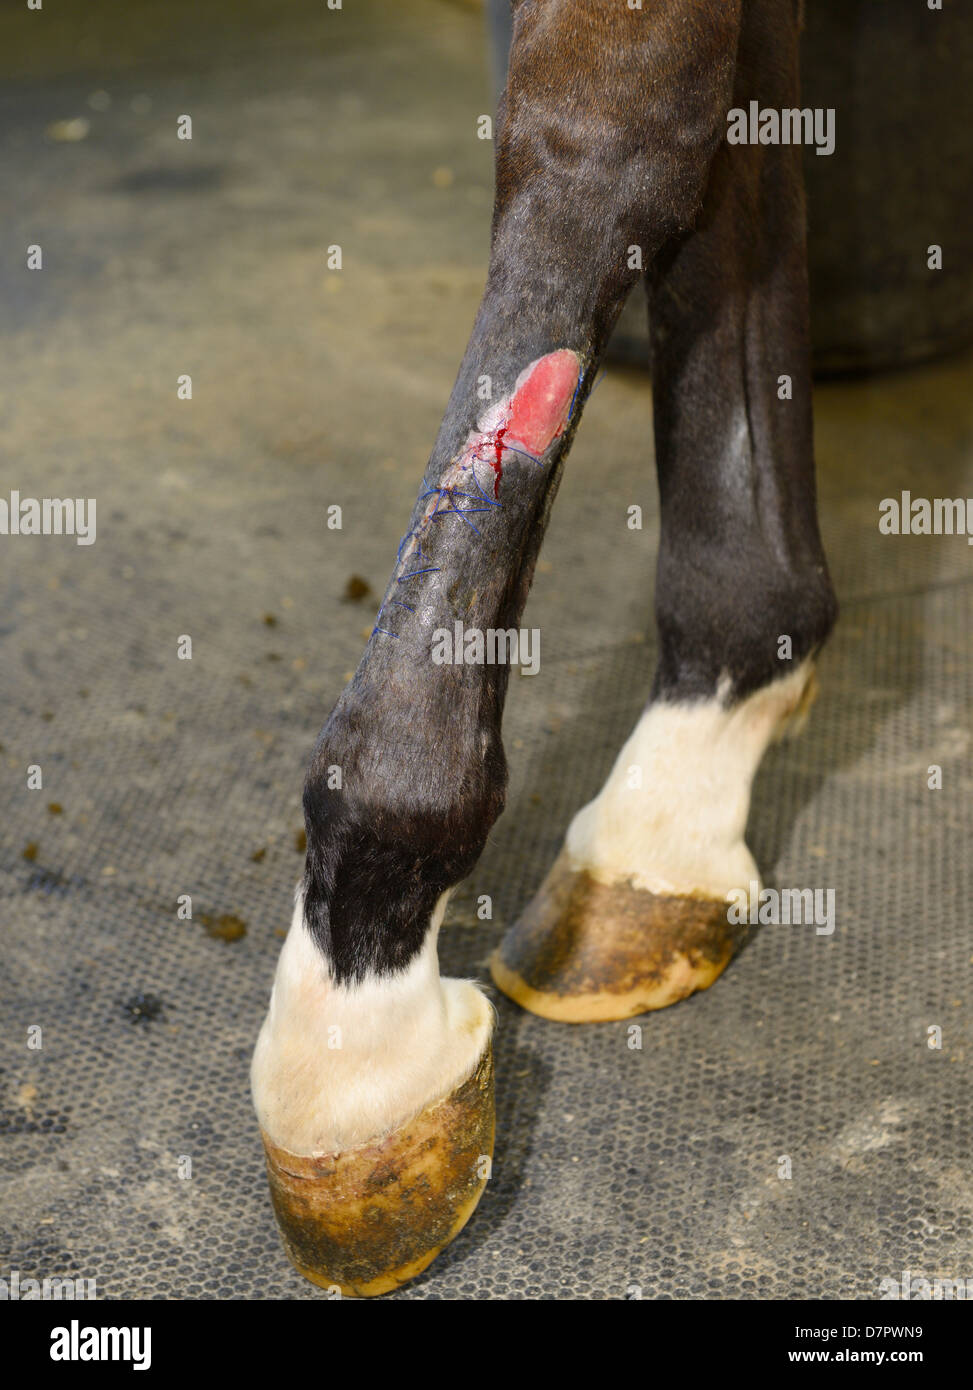 Derazil 1: Stitches one month after injury of hind leg of thoroughbred horse and one week after veterinarian surgery to remove proud flesh Stock Photo